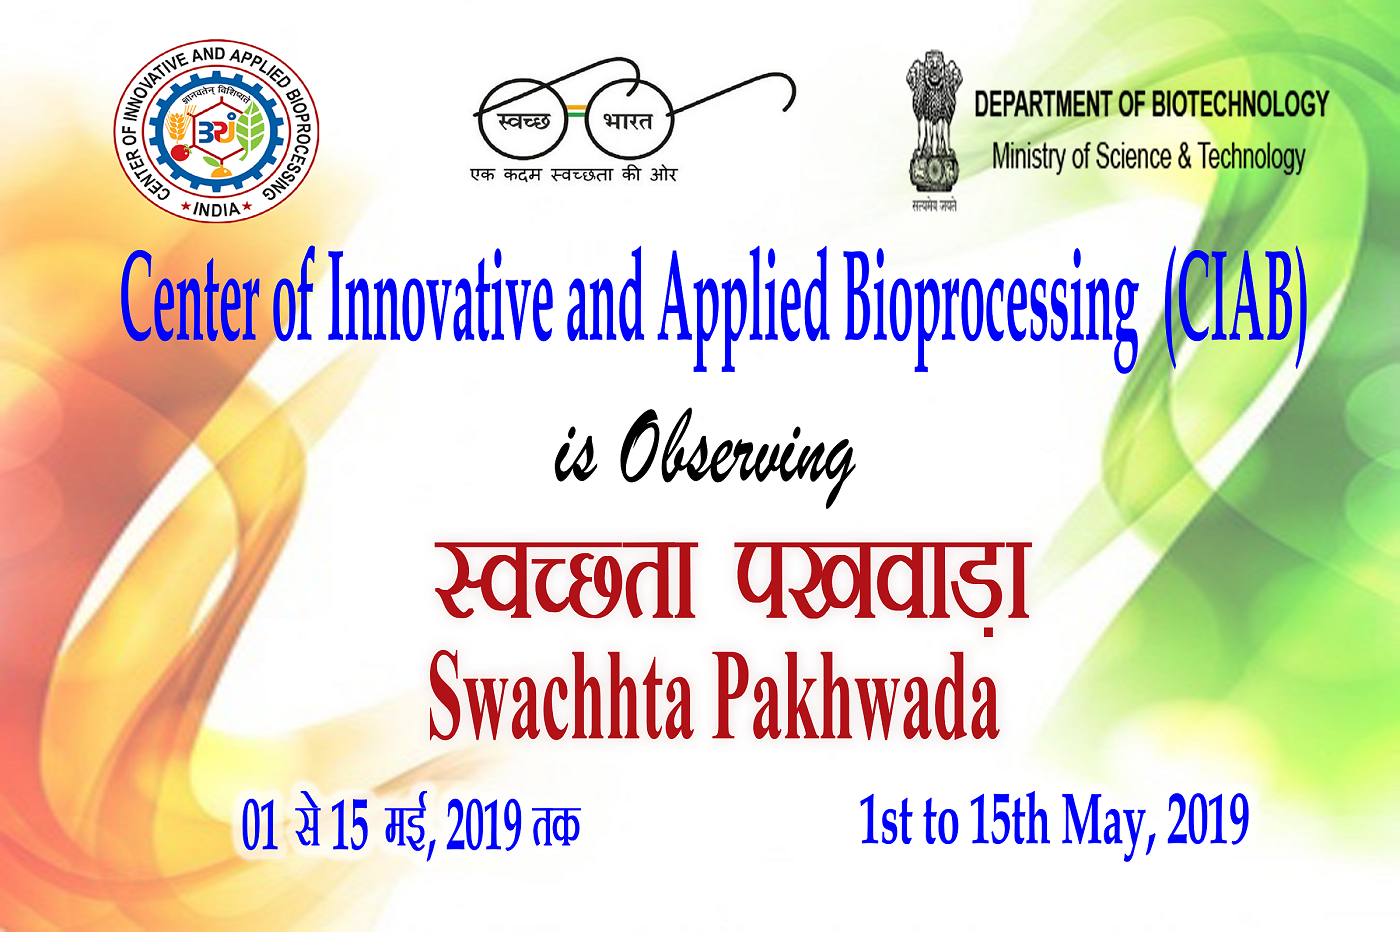 CIAB is observing Swachhta Pakhwara from 1st to 15th May, 2019